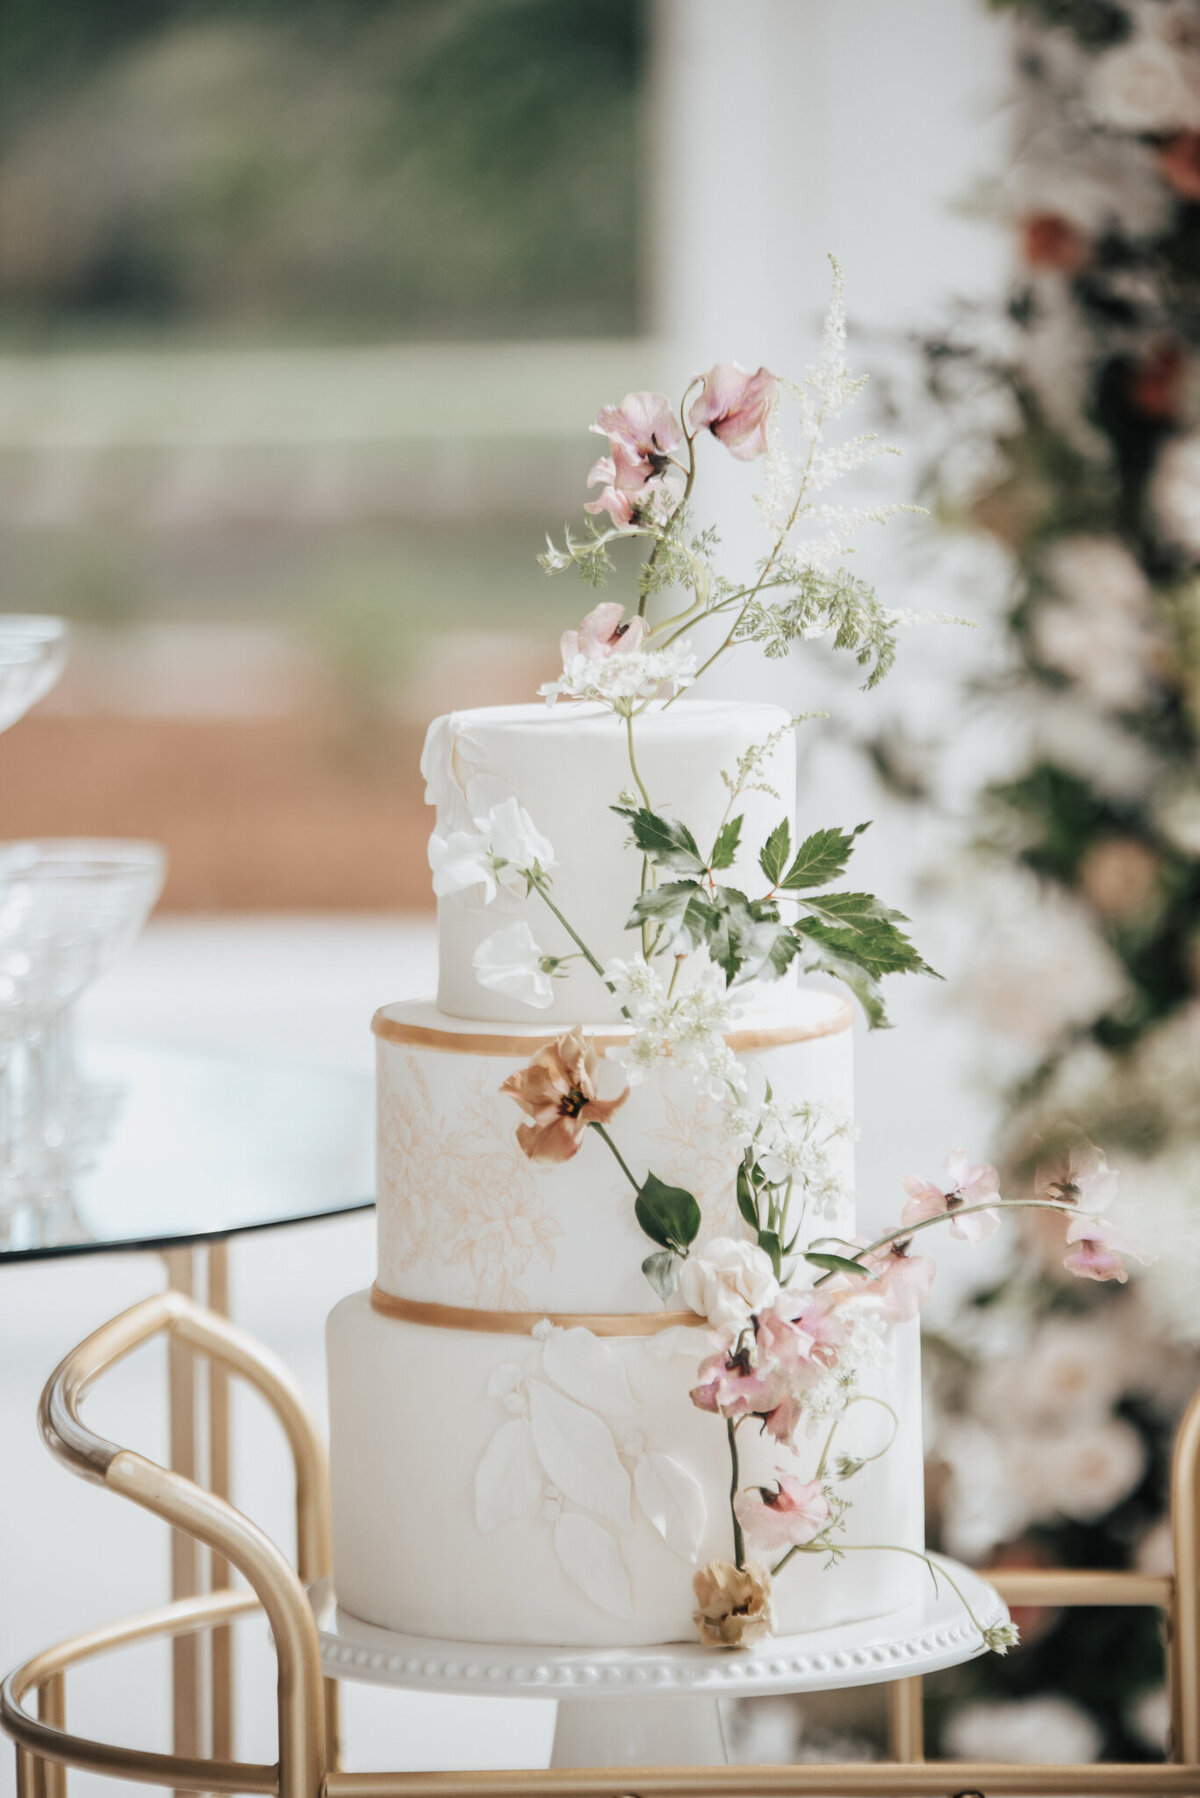 Gorgeous cake with white and pink by Calyx Floral Design, an innovative Red Deer, Alberta wedding florist, featured on the Brontë Bride Vendor Guide.